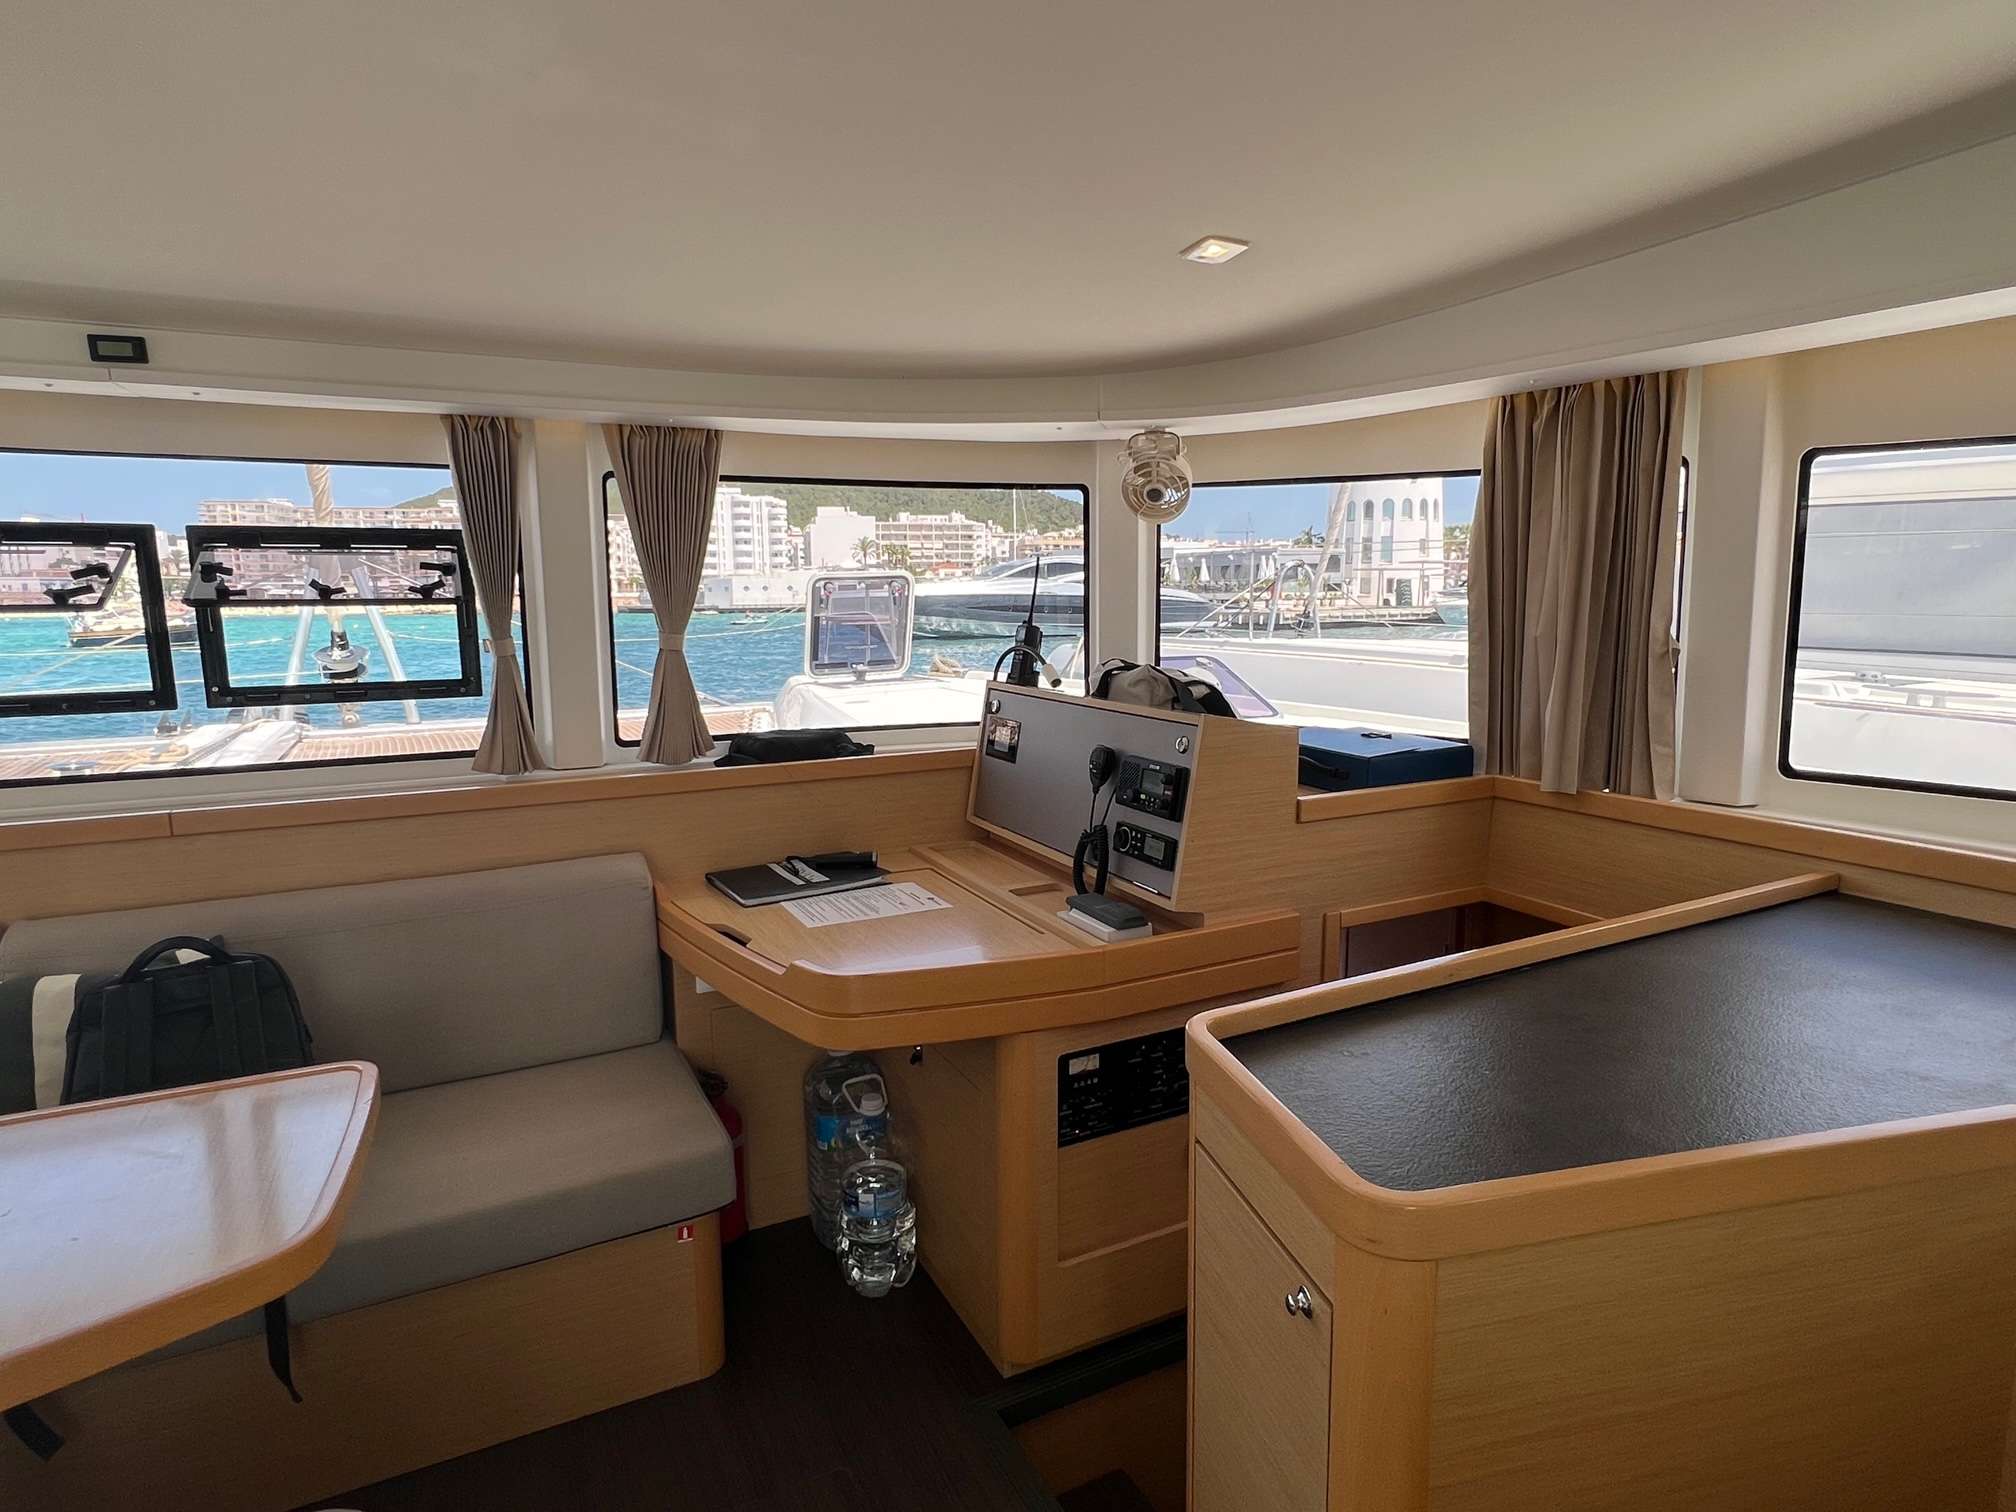 MARES - Yacht Charter Palamos & Boat hire in Balearics & Spain 4